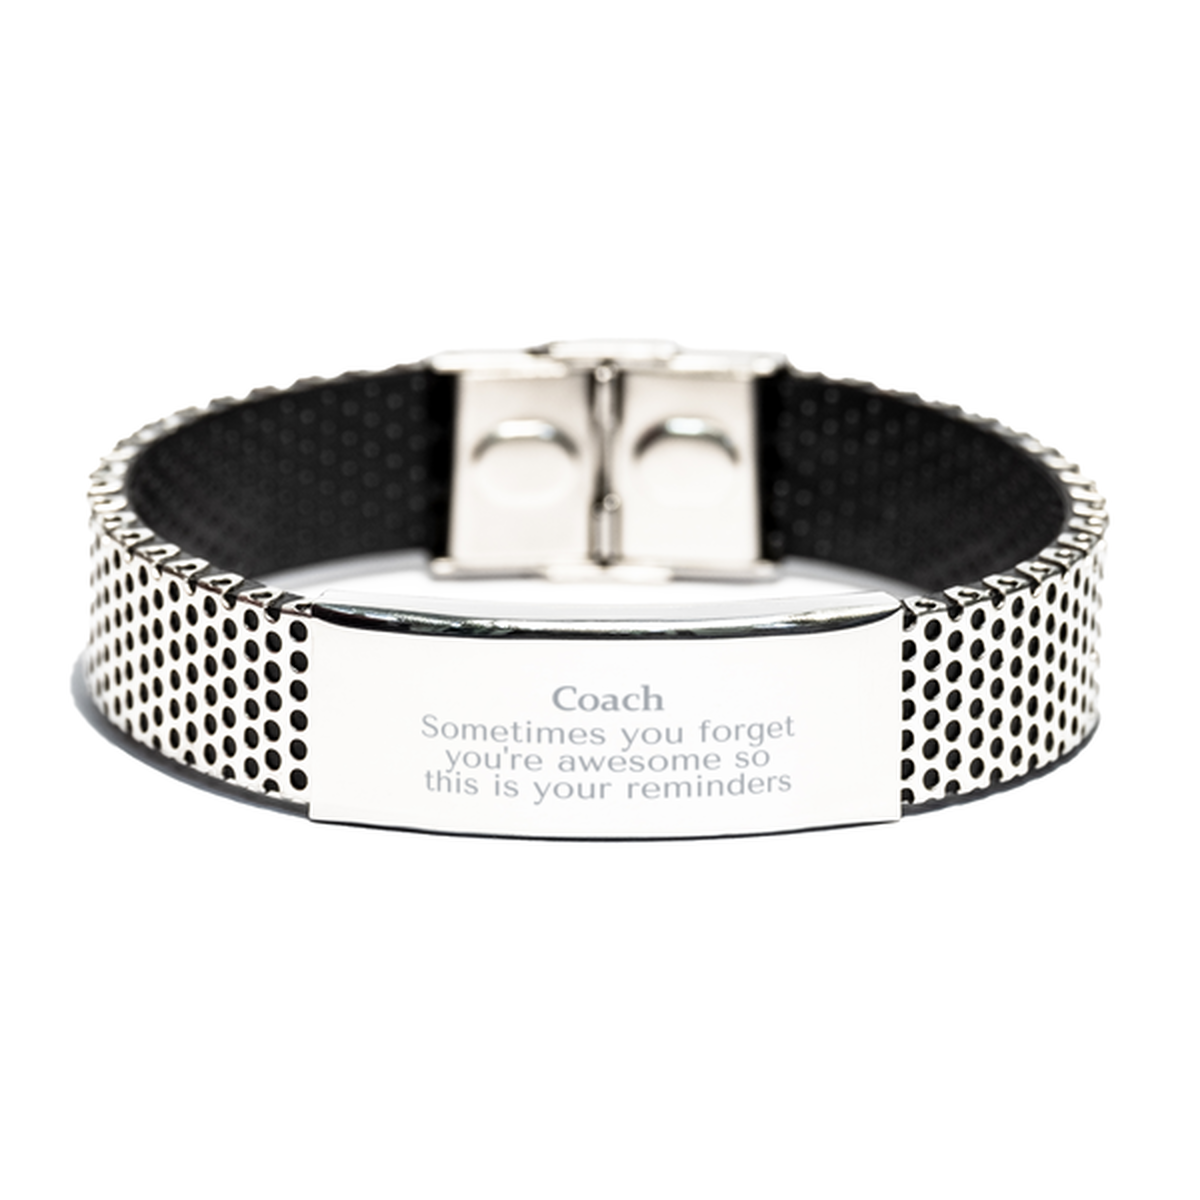 Sentimental Coach Stainless Steel Bracelet, Coach Sometimes you forget you're awesome so this is your reminders, Graduation Christmas Birthday Gifts for Coach, Men, Women, Coworkers